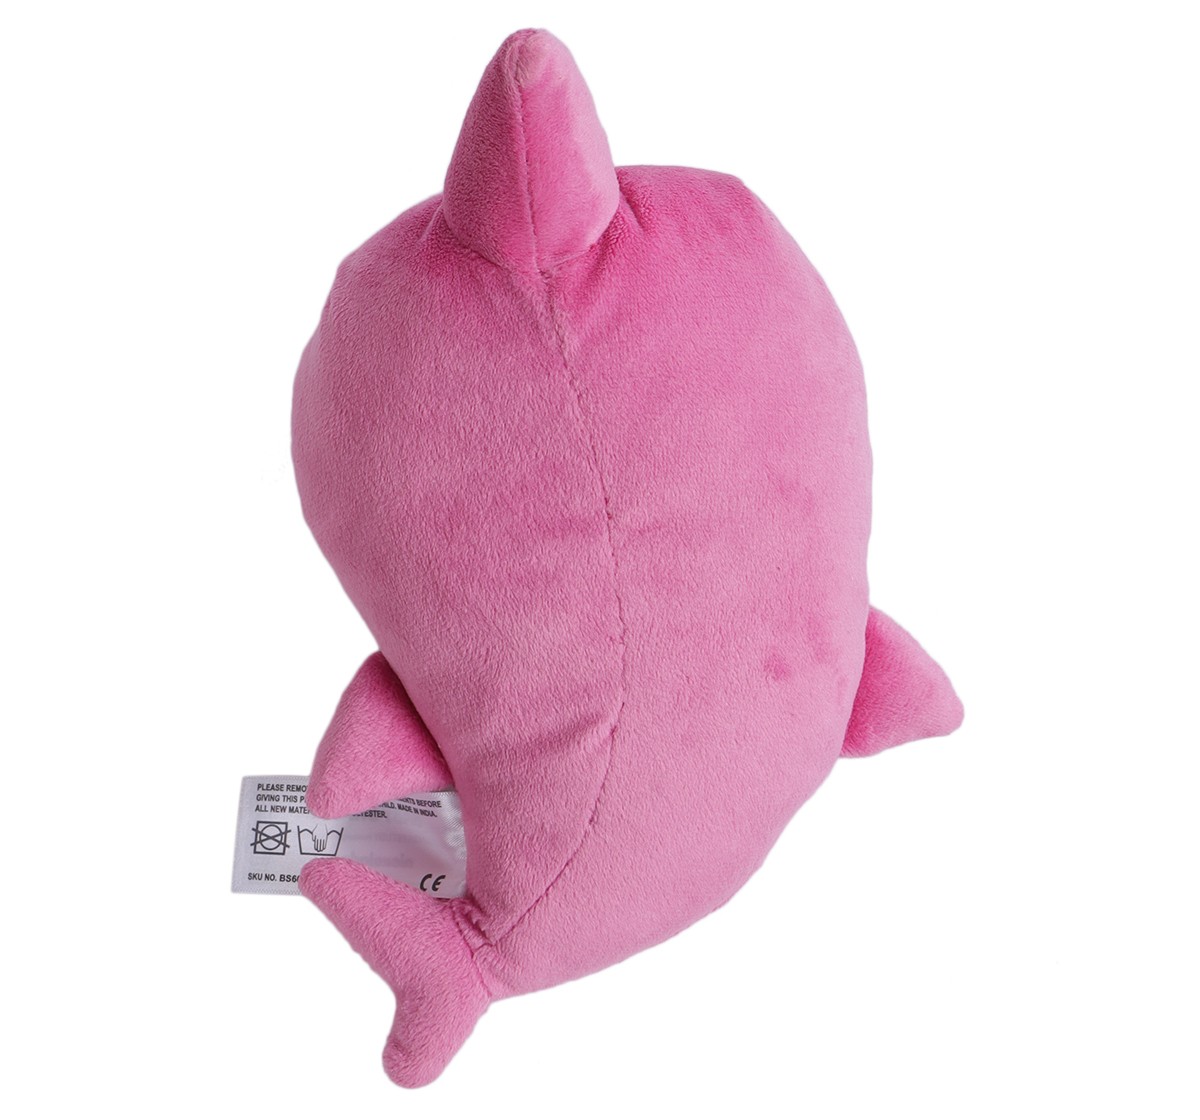 Baby Shark Plush Sing and Light up Plush Toy 12 Inch Mommy Shark for 1 Year and Above